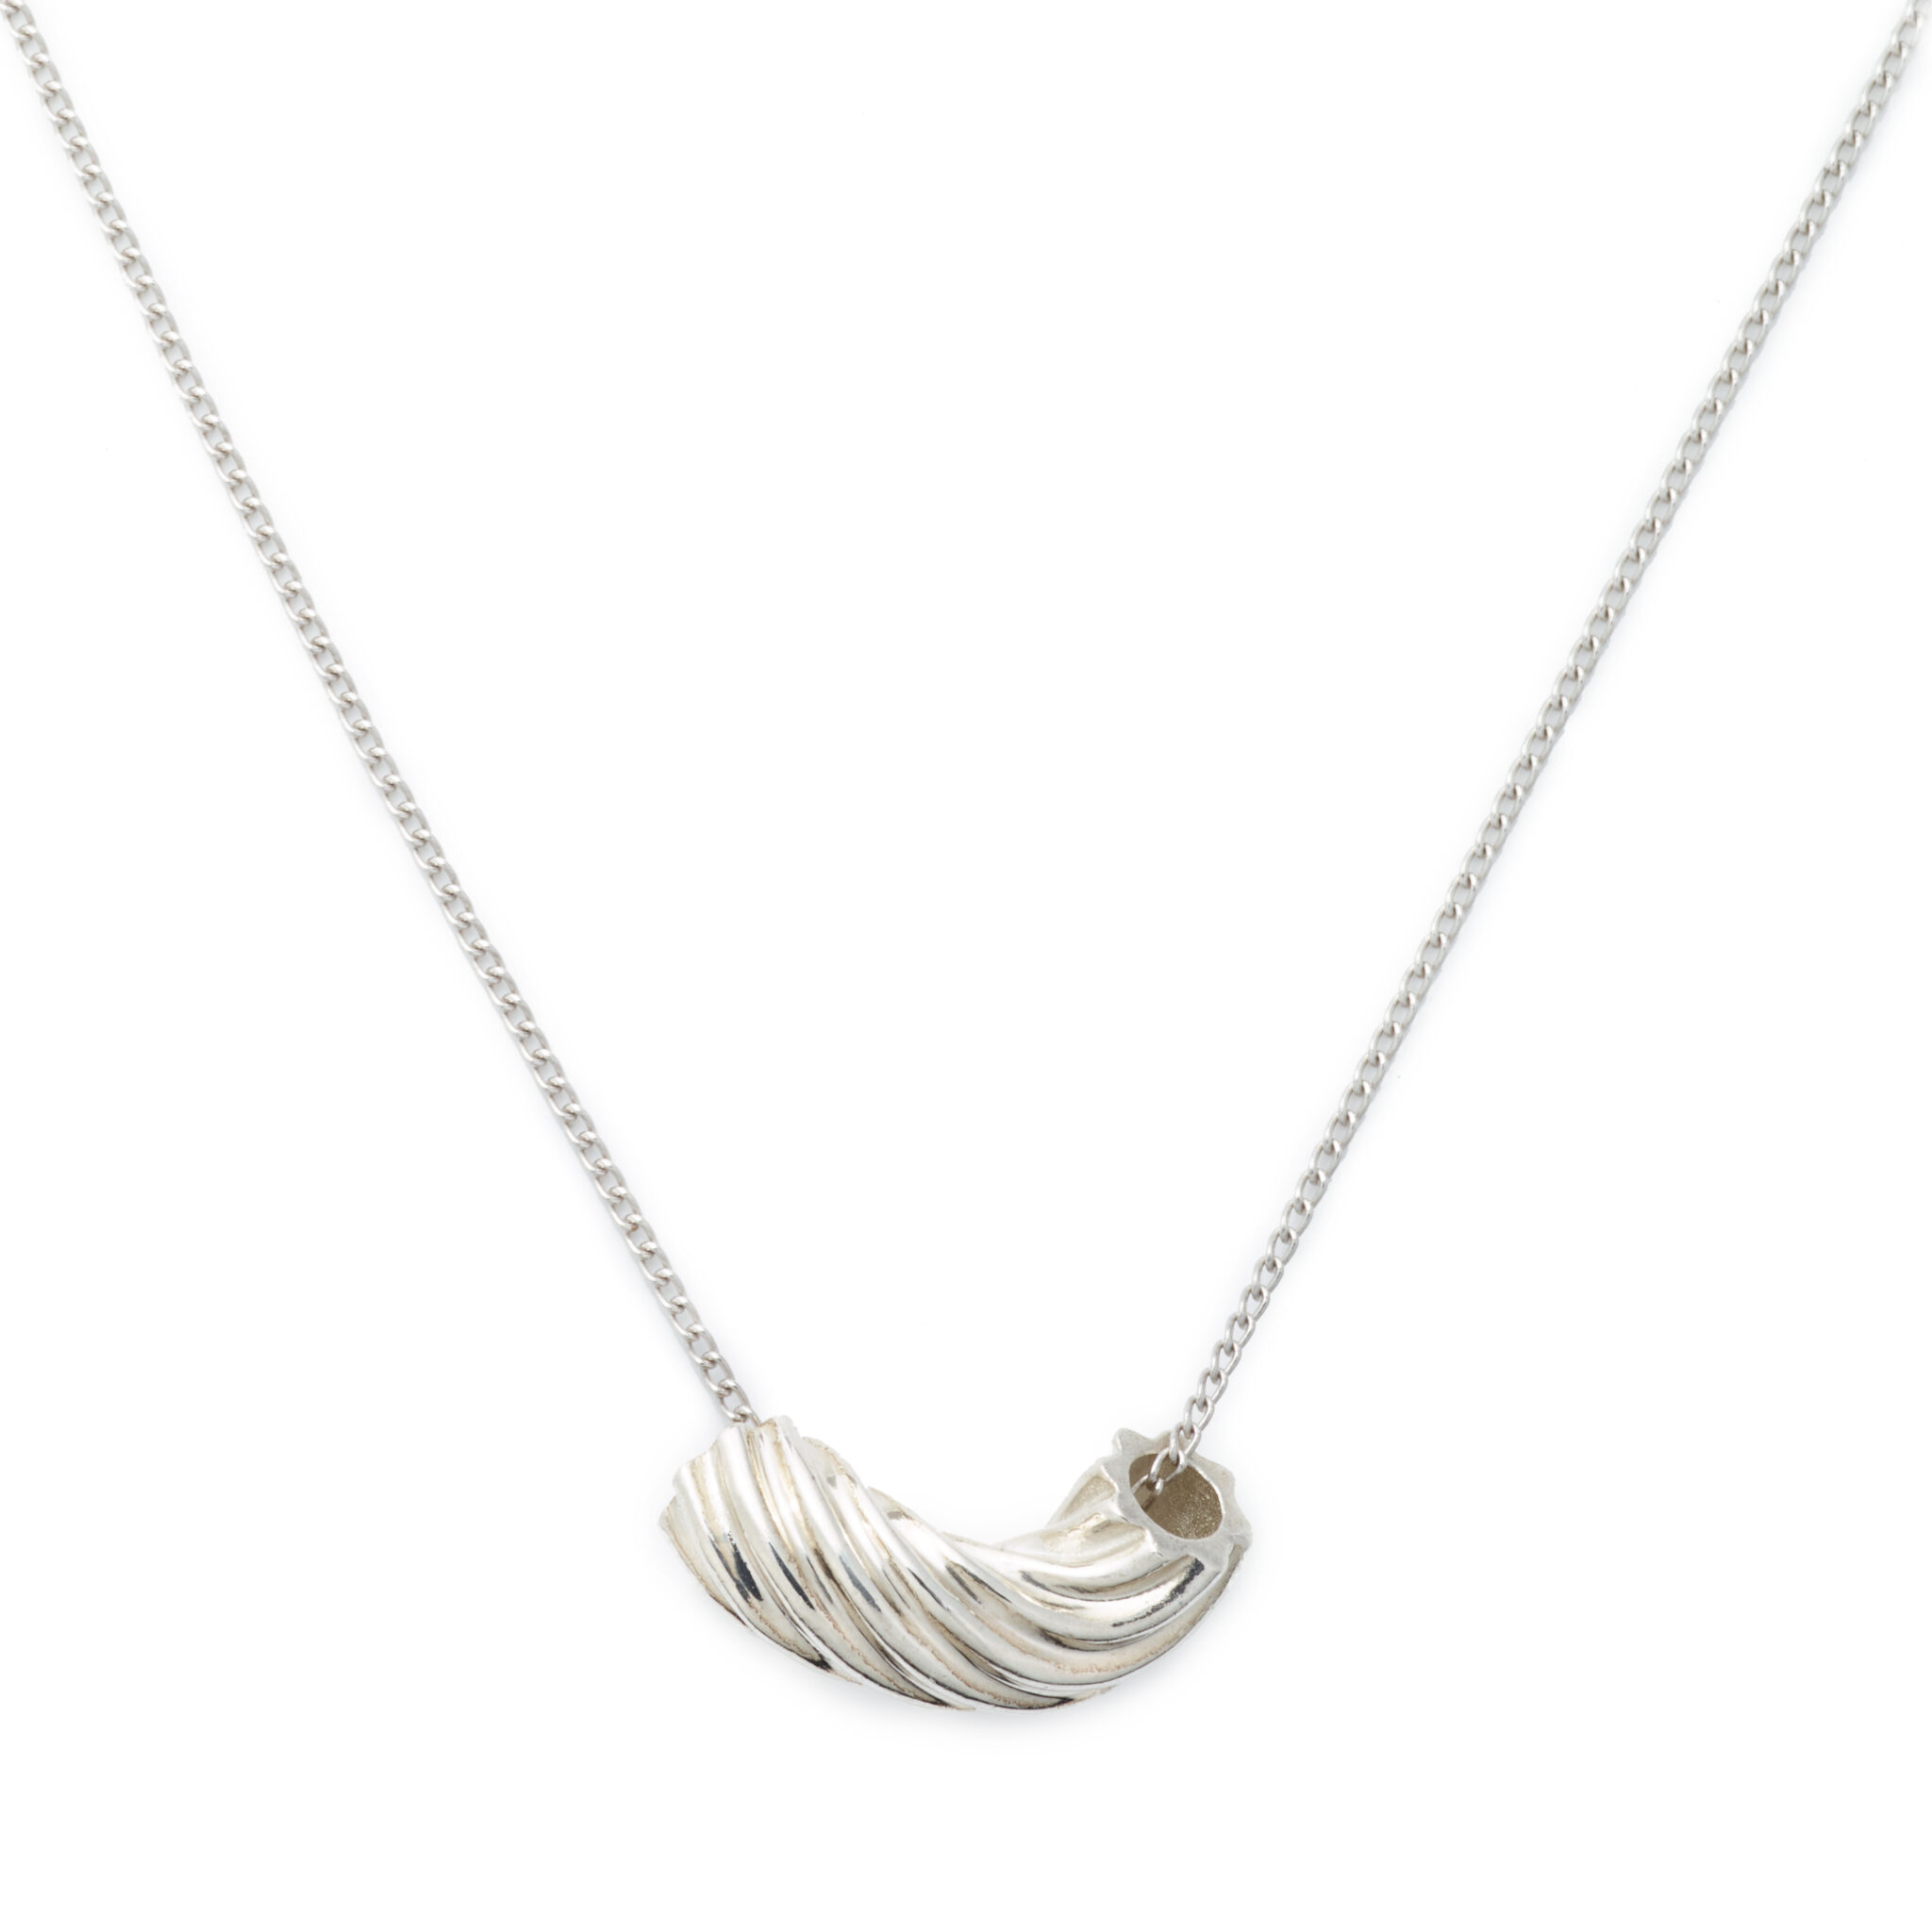 Elbow Macaroni Necklace, Sterling Silver